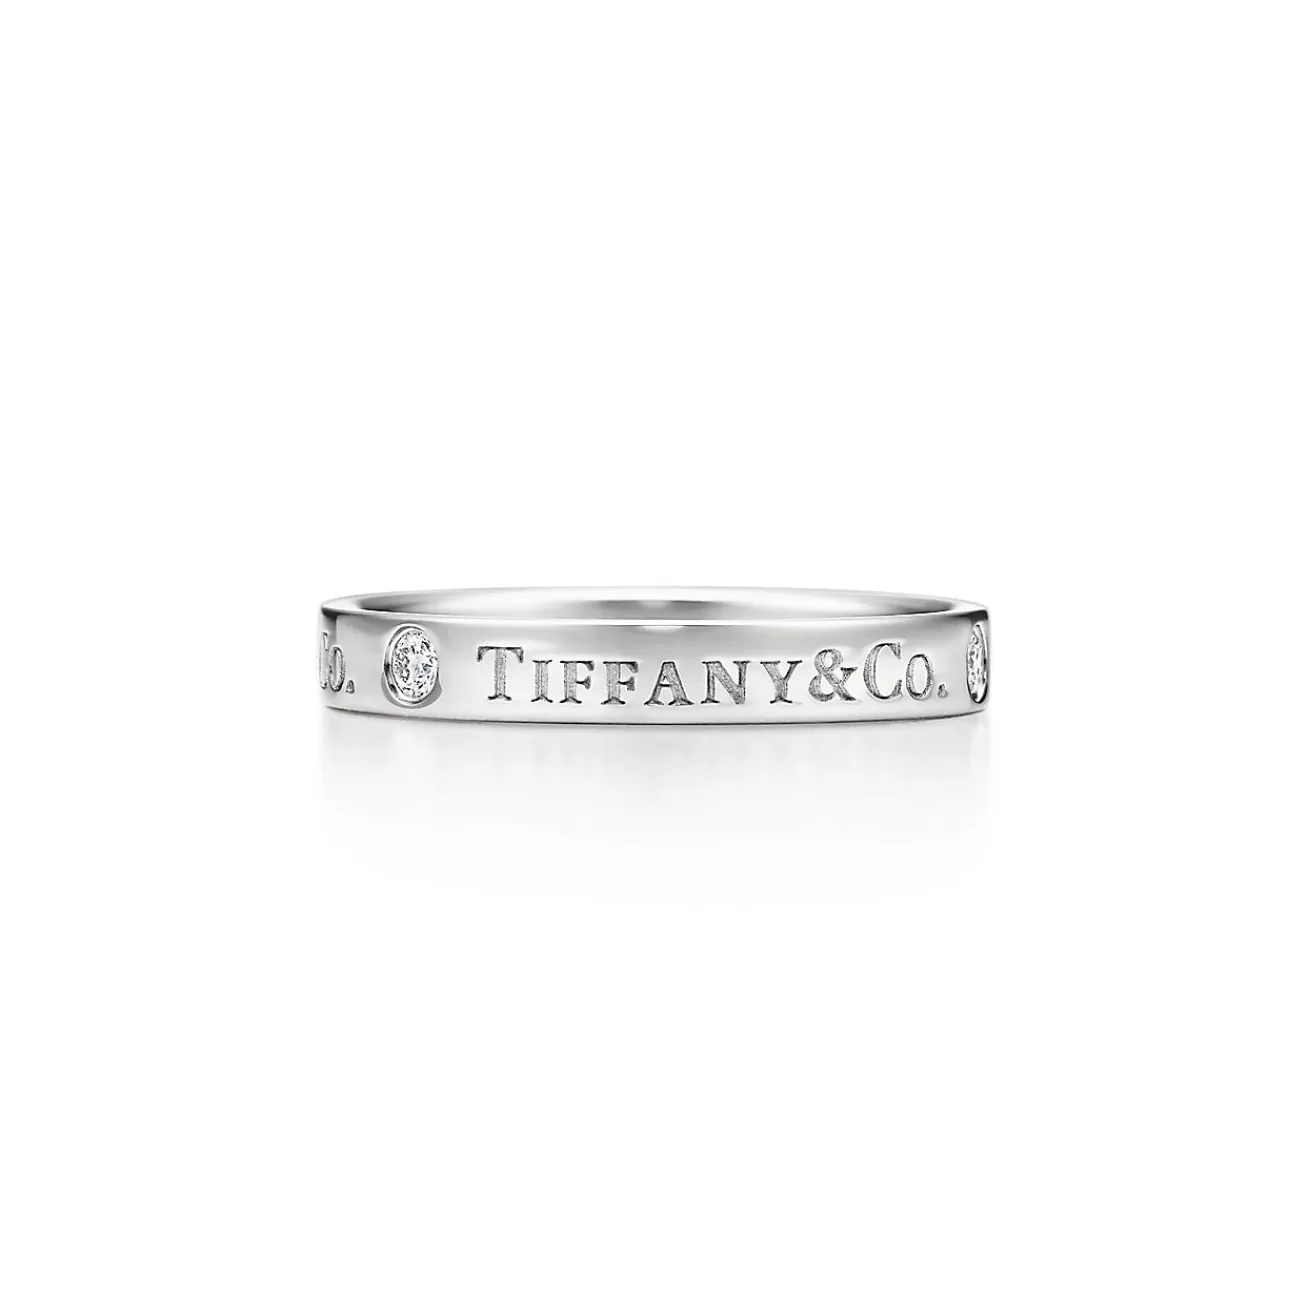 Tiffany & Co. T&CO.® band ring with diamonds in platinum, 3mm wide. | ^Women Rings | Platinum Jewelry